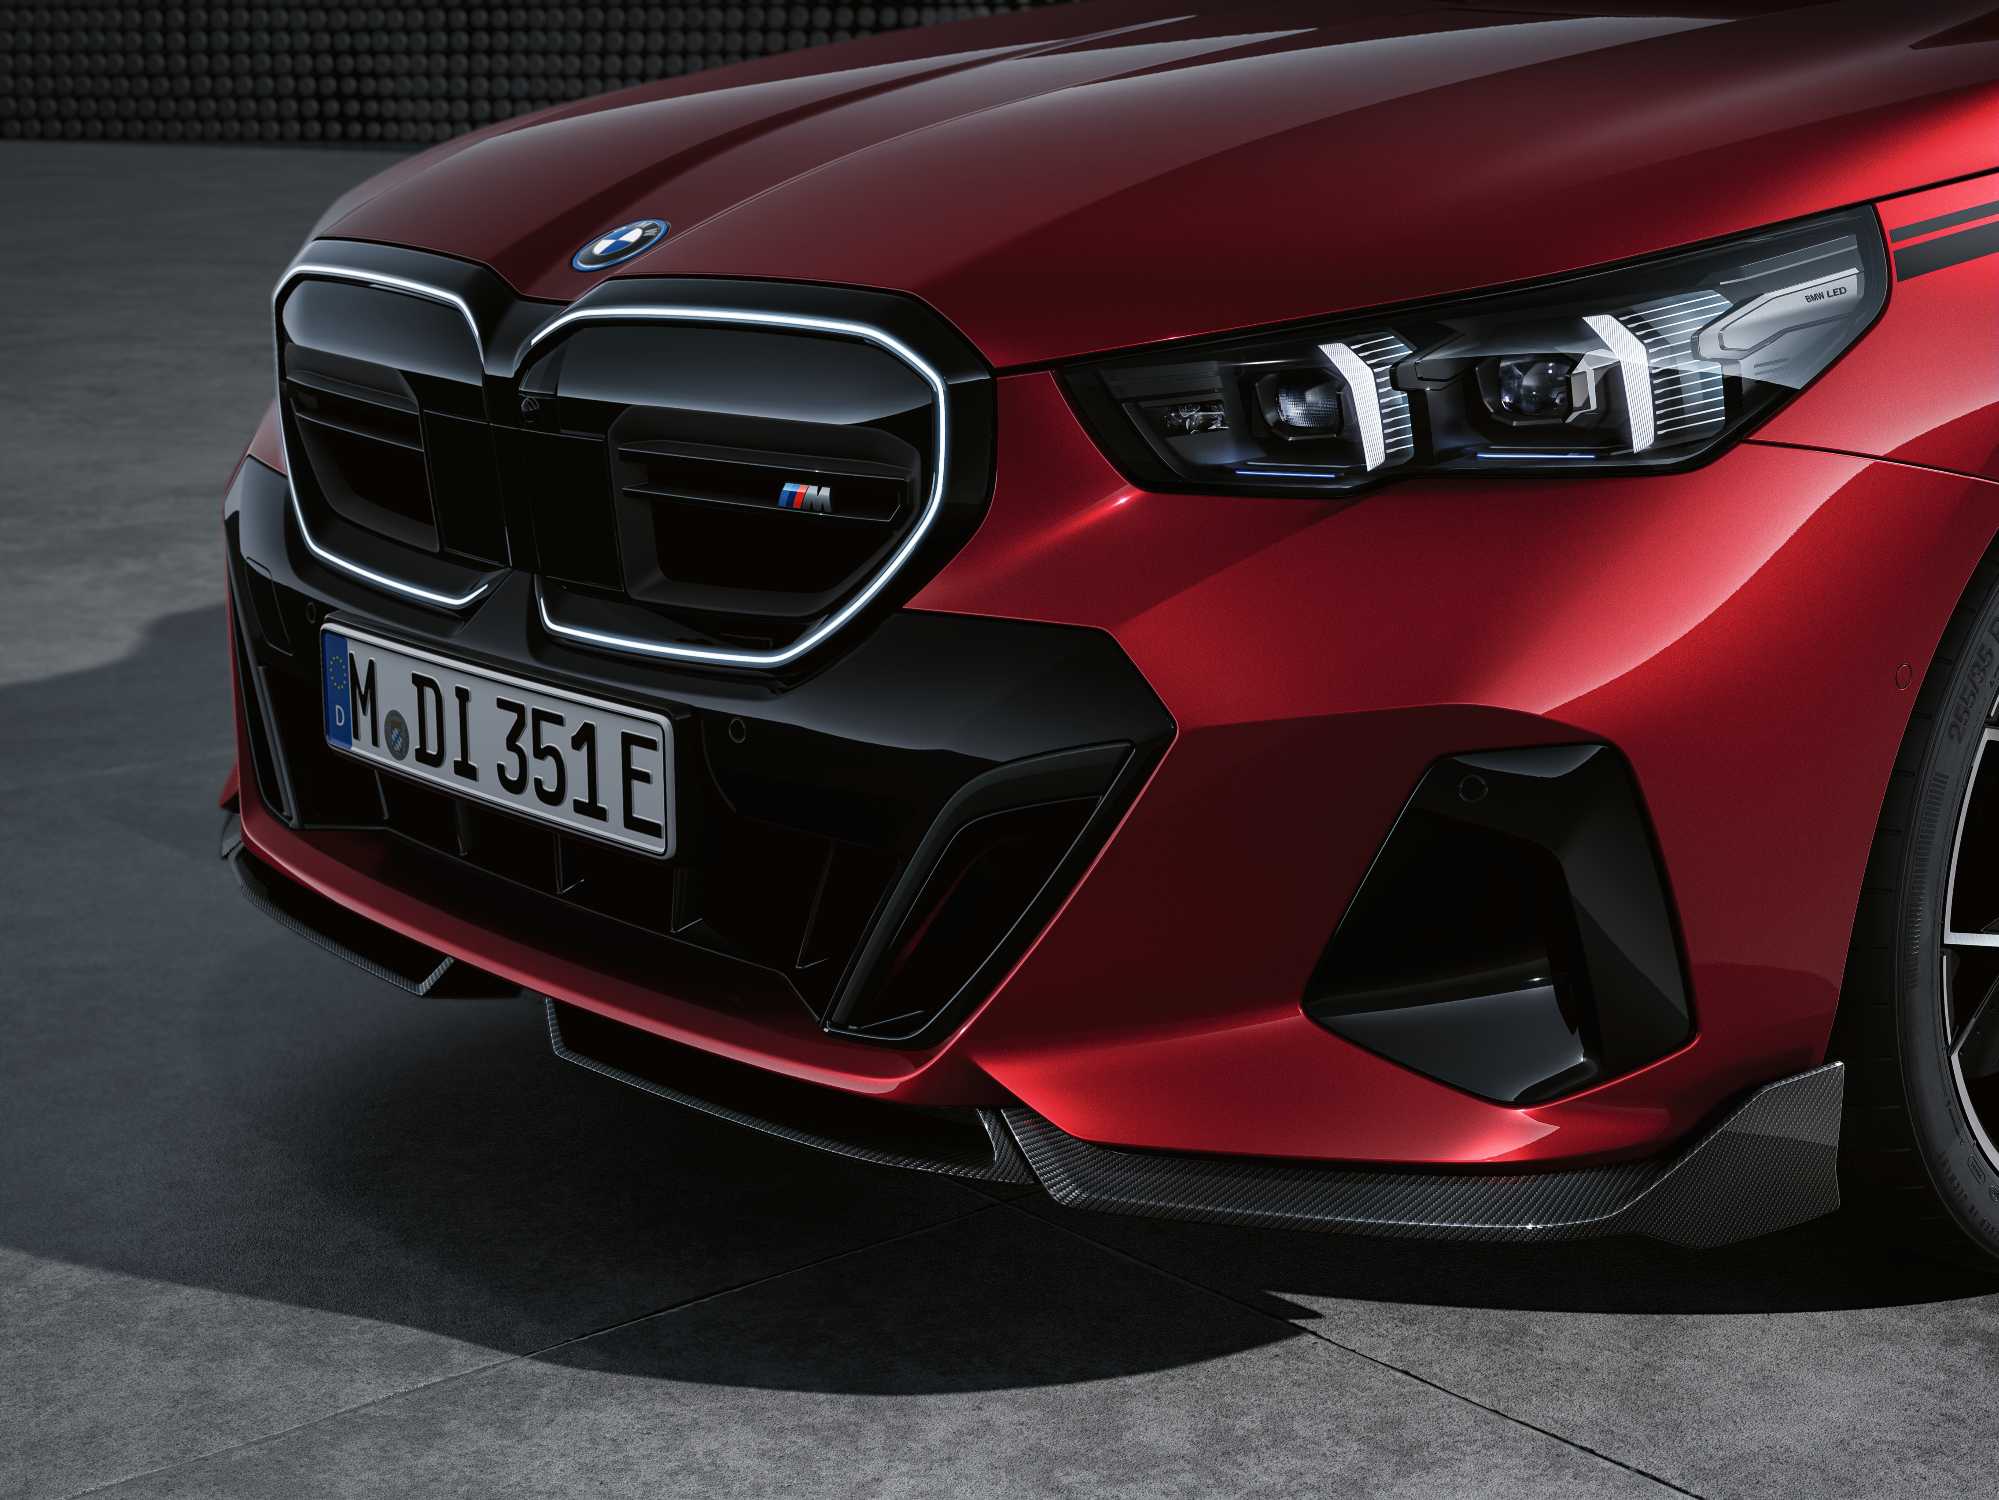 Exclusive sportiness for every occasion: BMW M Performance Parts for the new BMW 5 Series Touring and the new BMW i5 Touring.